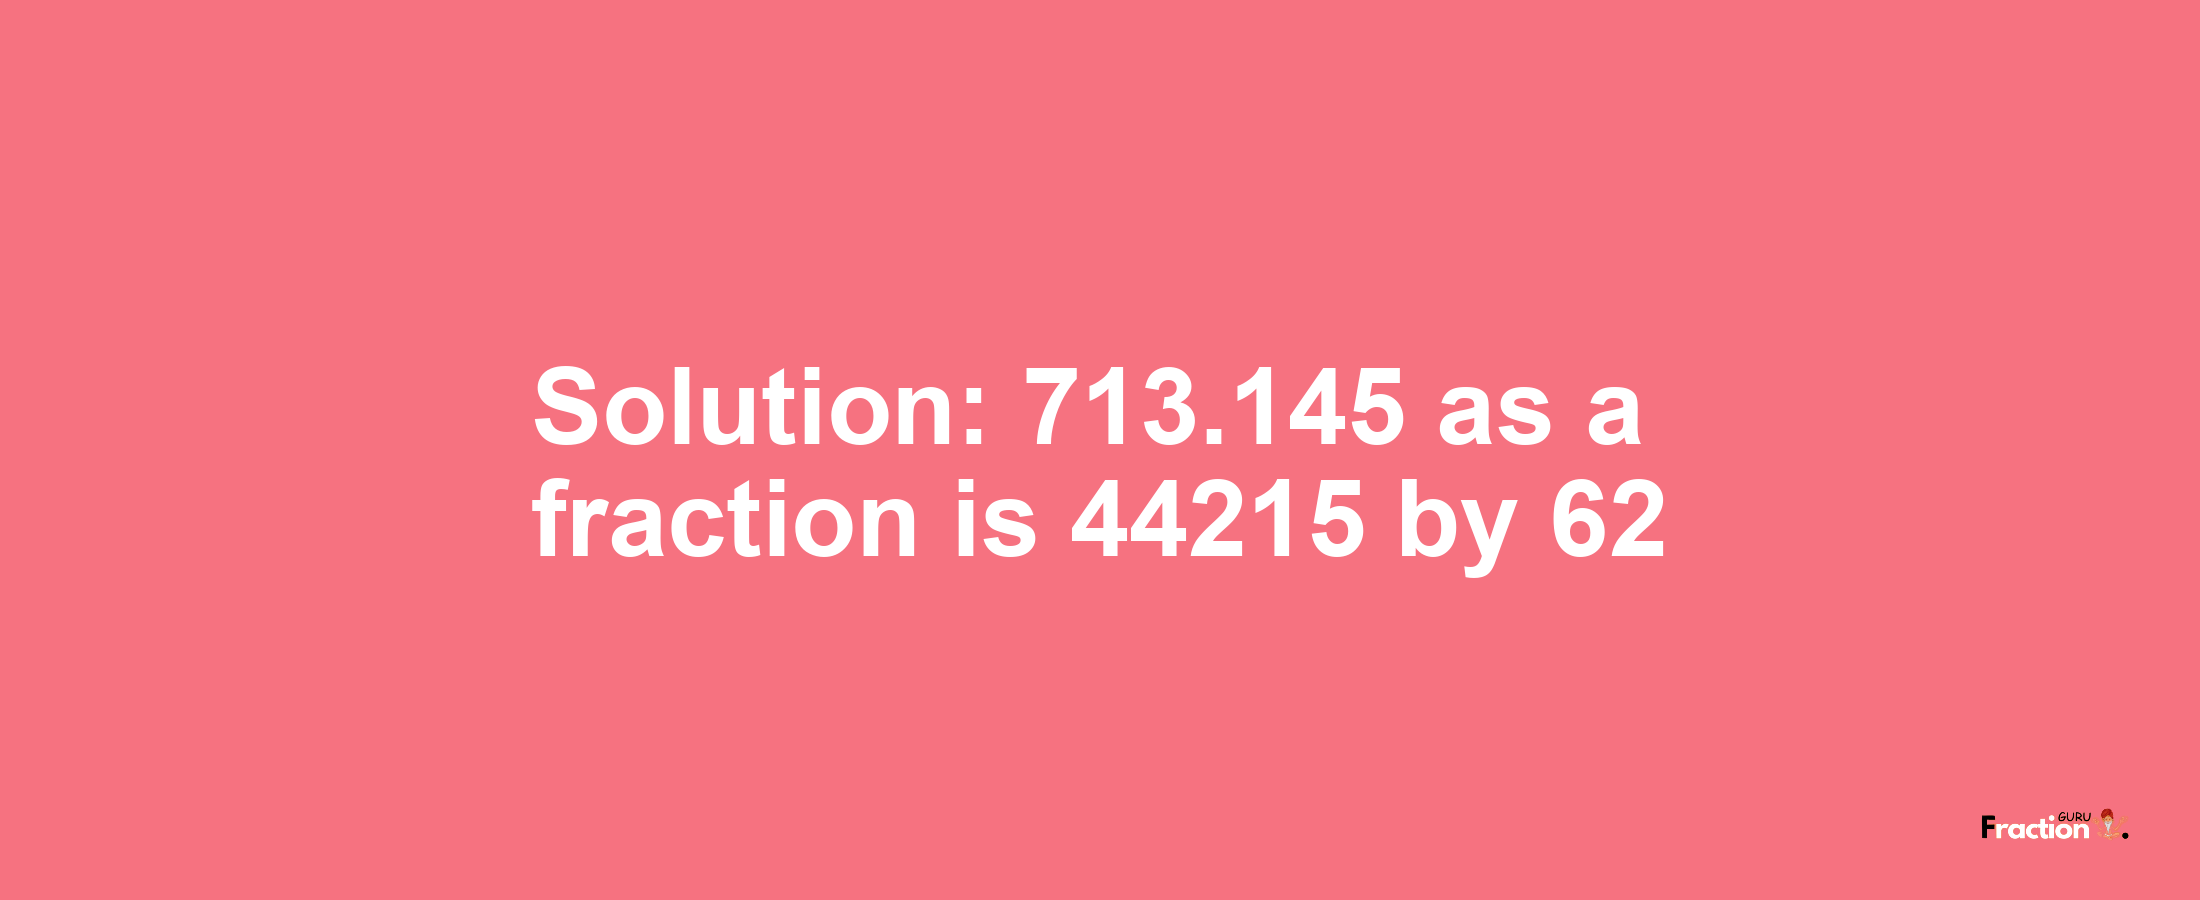 Solution:713.145 as a fraction is 44215/62